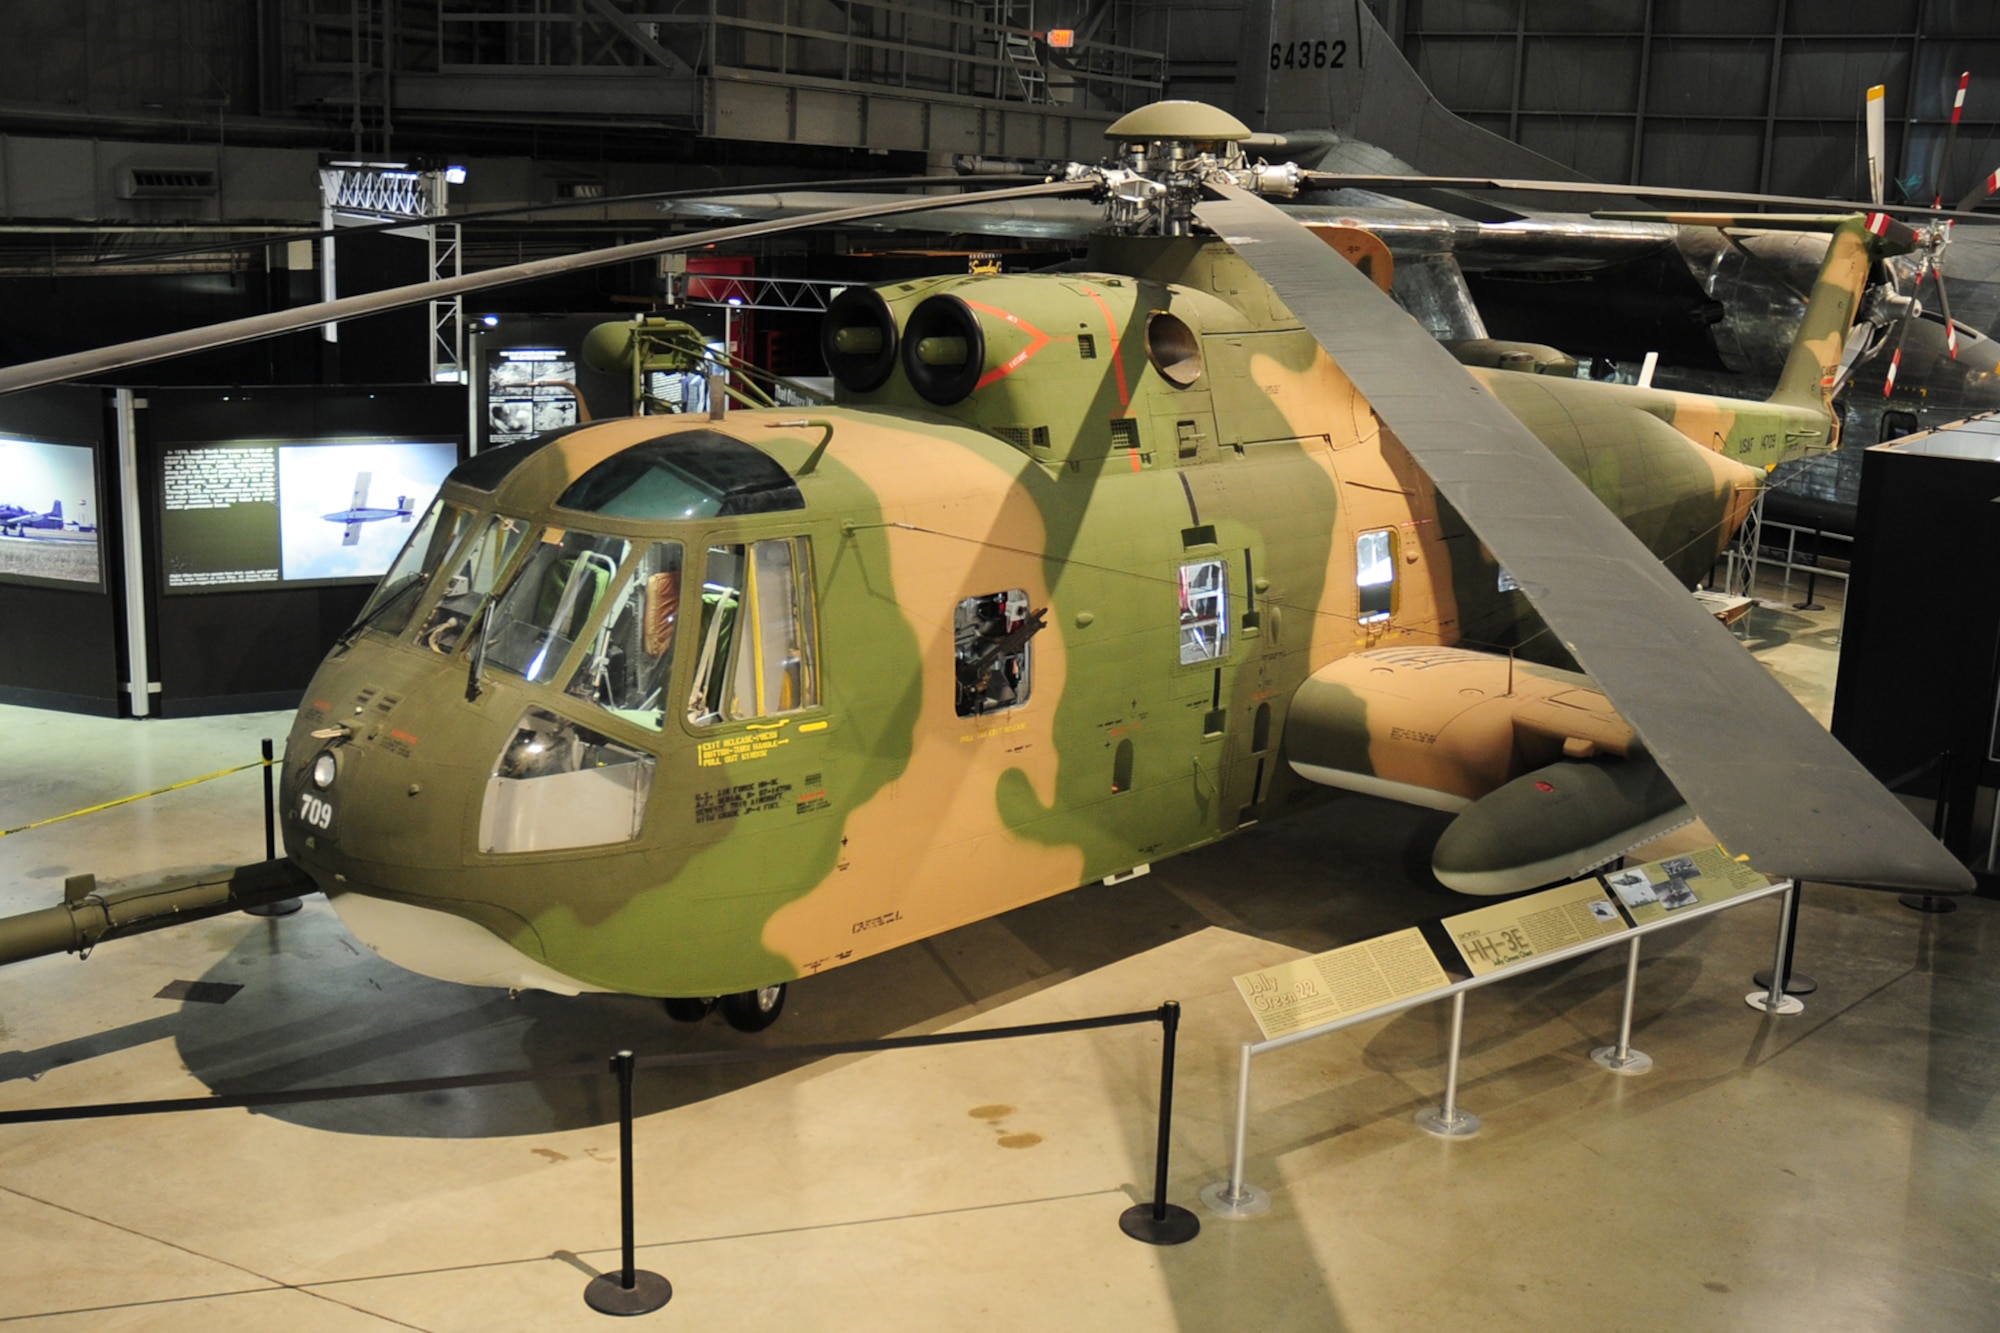 DAYTON, Ohio -- Sikorsky HH-3 in the Southeast Asia War Gallery at the National Museum of the United States Air Force. (U.S. Air Force photo by Ken LaRock) 